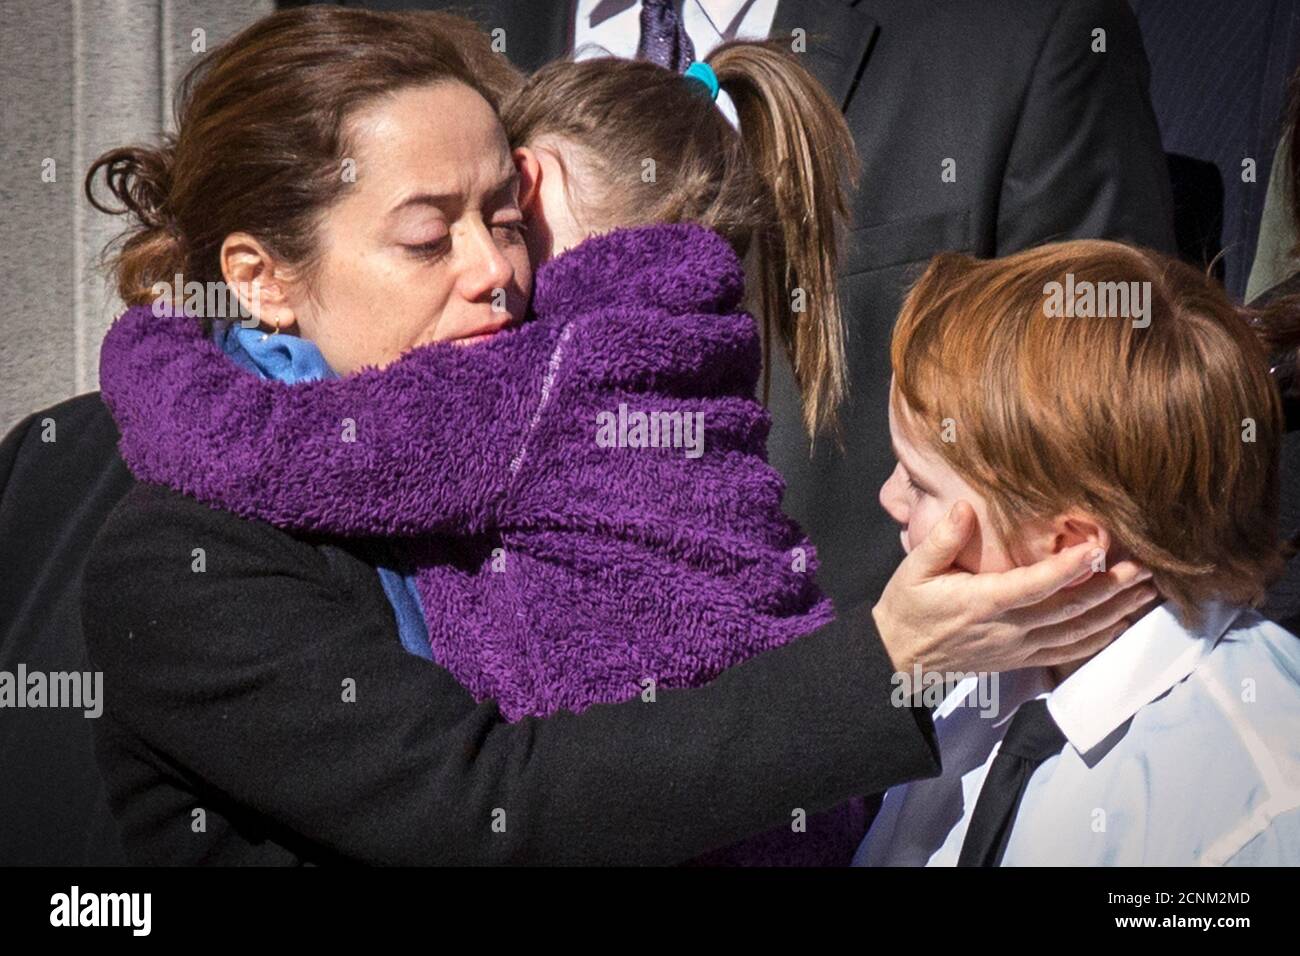 Mimi O'Donell (C), former partner of actor Phillip Seymour Hoffman, holds  her daughter Willa as the casket arrives for the funeral of actor Phillip  Seymour Hoffman in the Manhattan borough of New